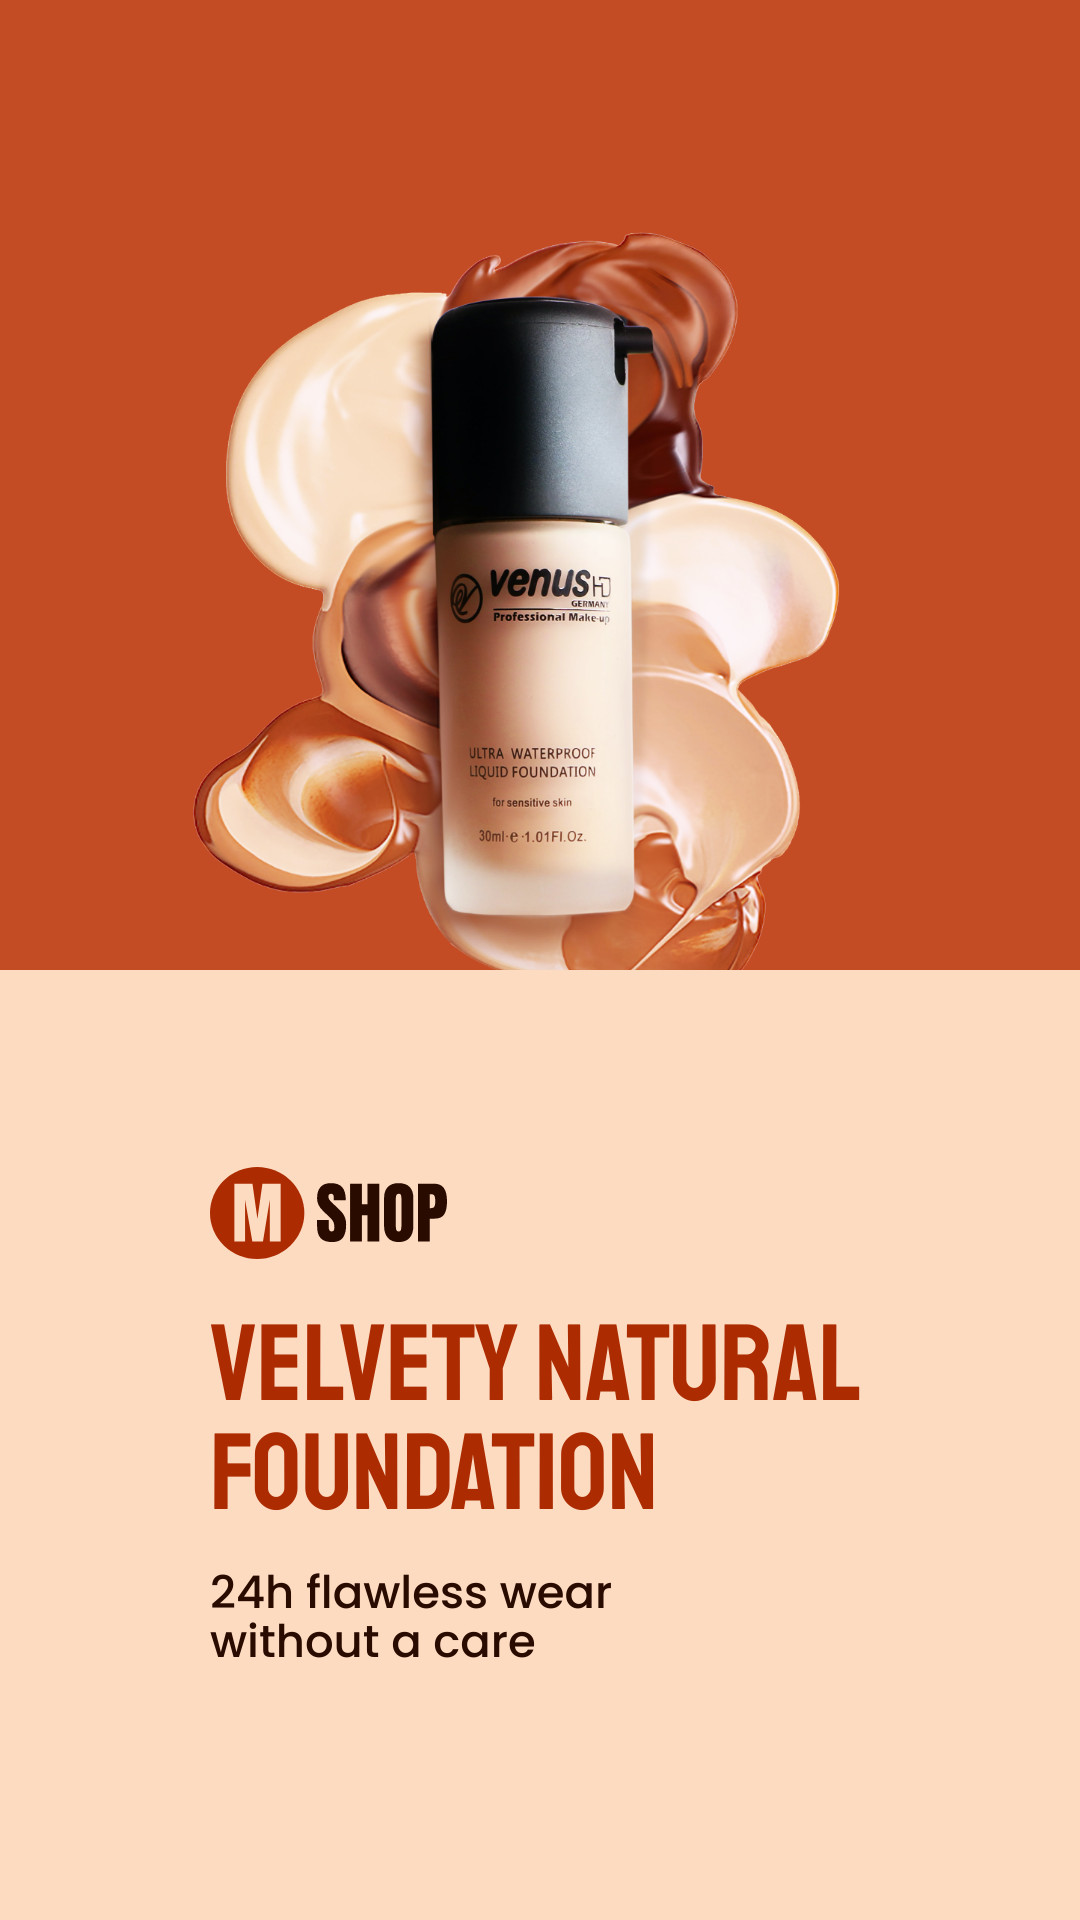 Velvety Natural Foundation Inline Rectangle 300x250